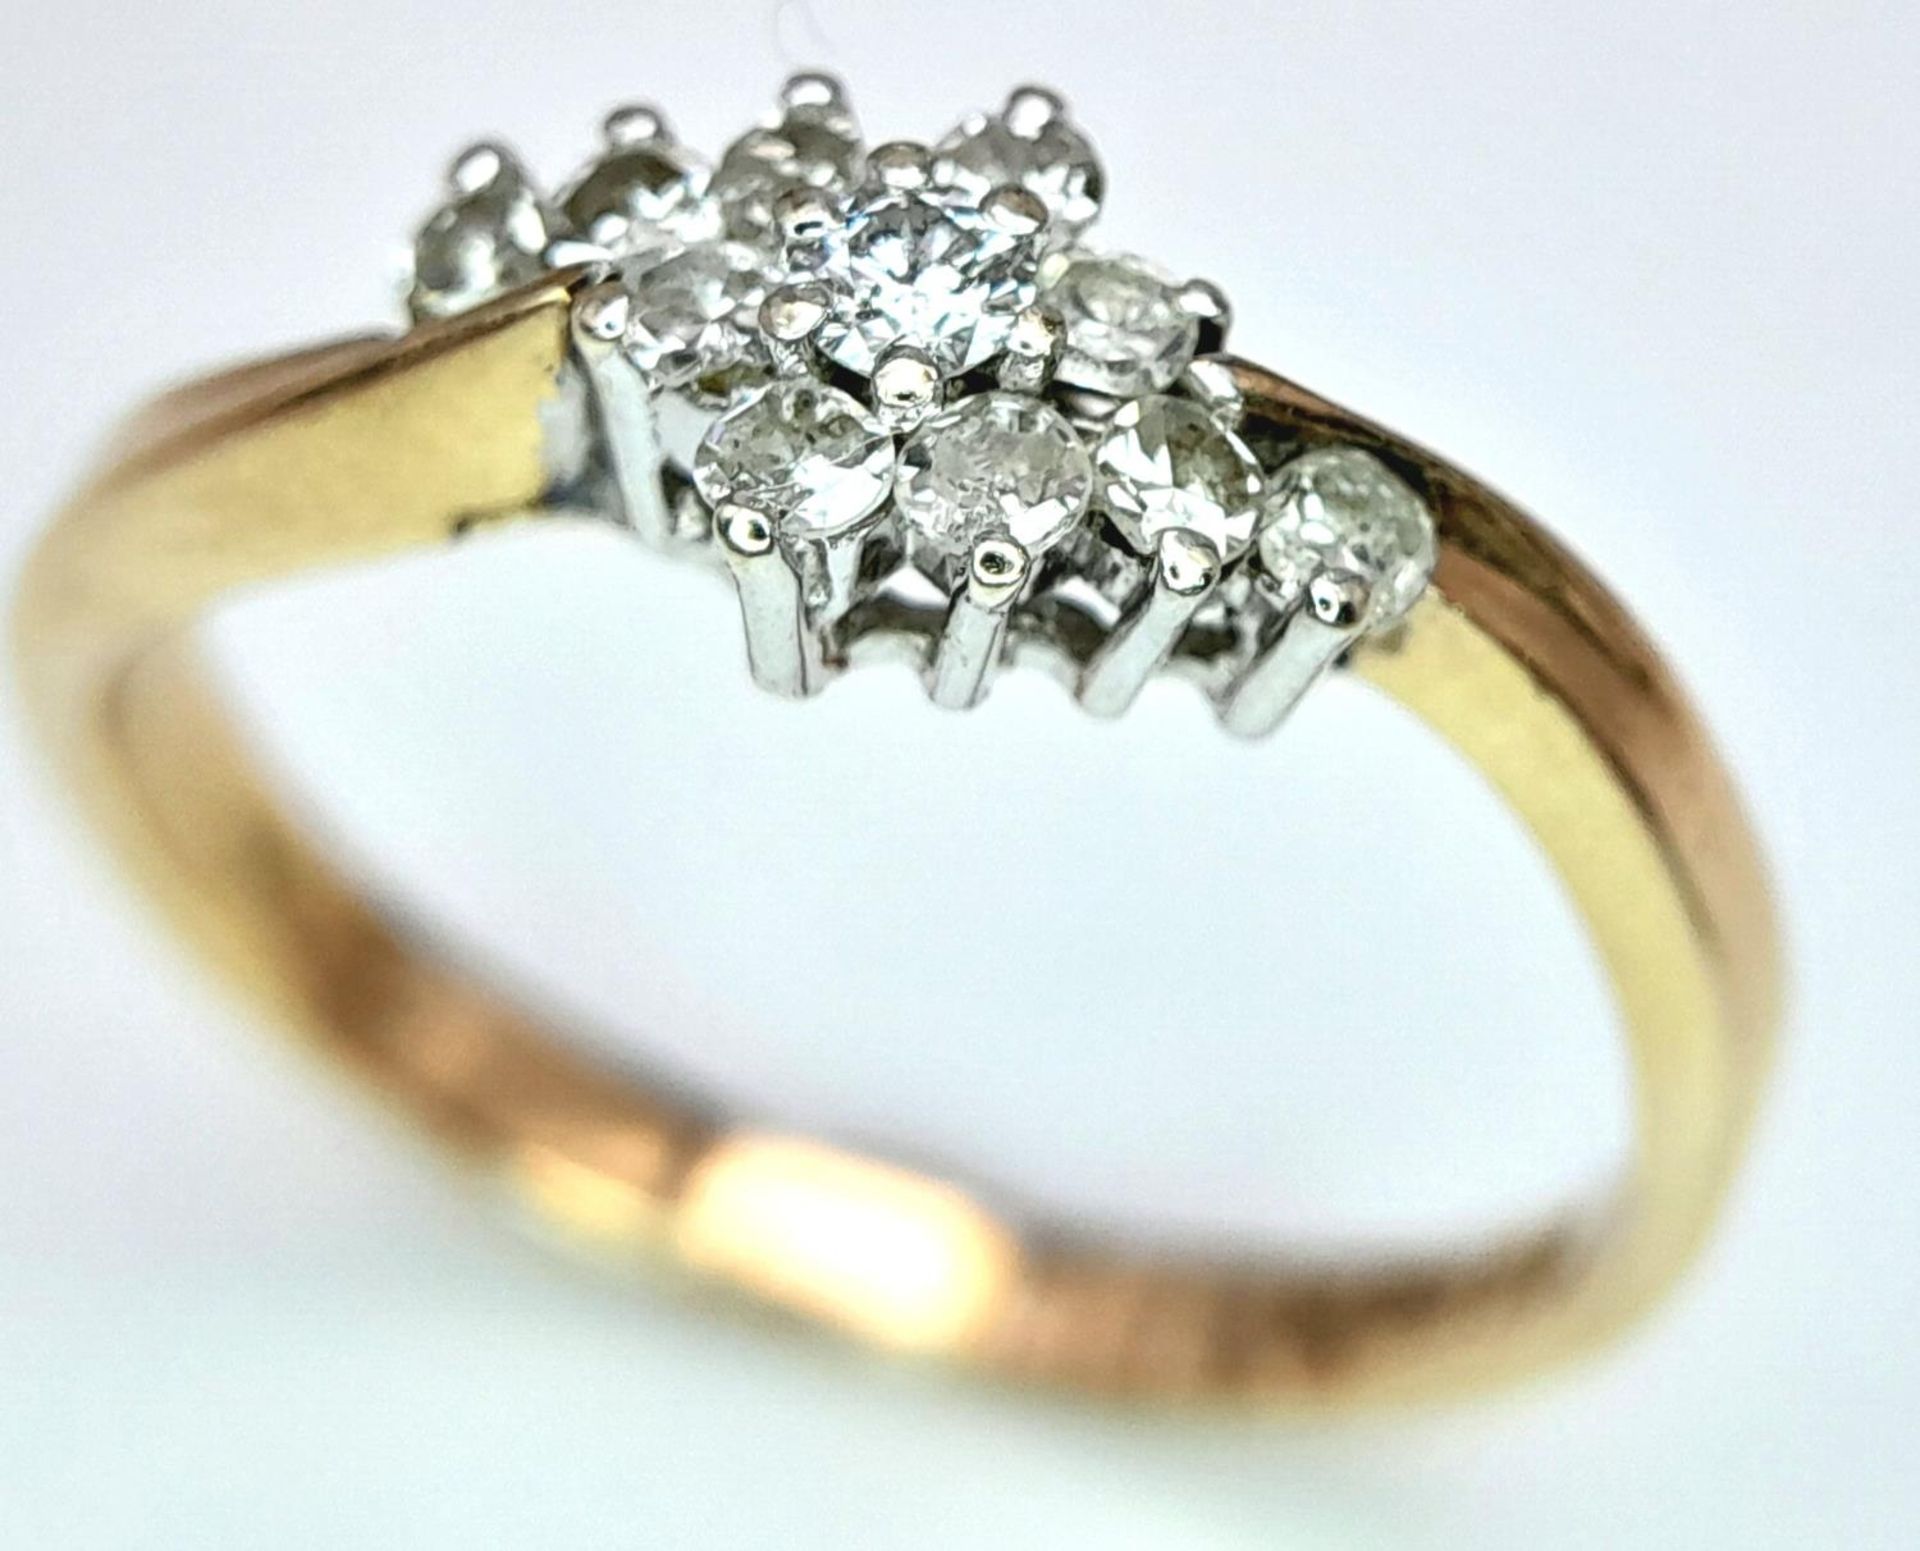 A 9K YELLOW GOLD DIAMOND CLUSTER RING 0.20CT. 1.6G SIZE J 1/2. ref: SPAS 9007 - Image 2 of 5